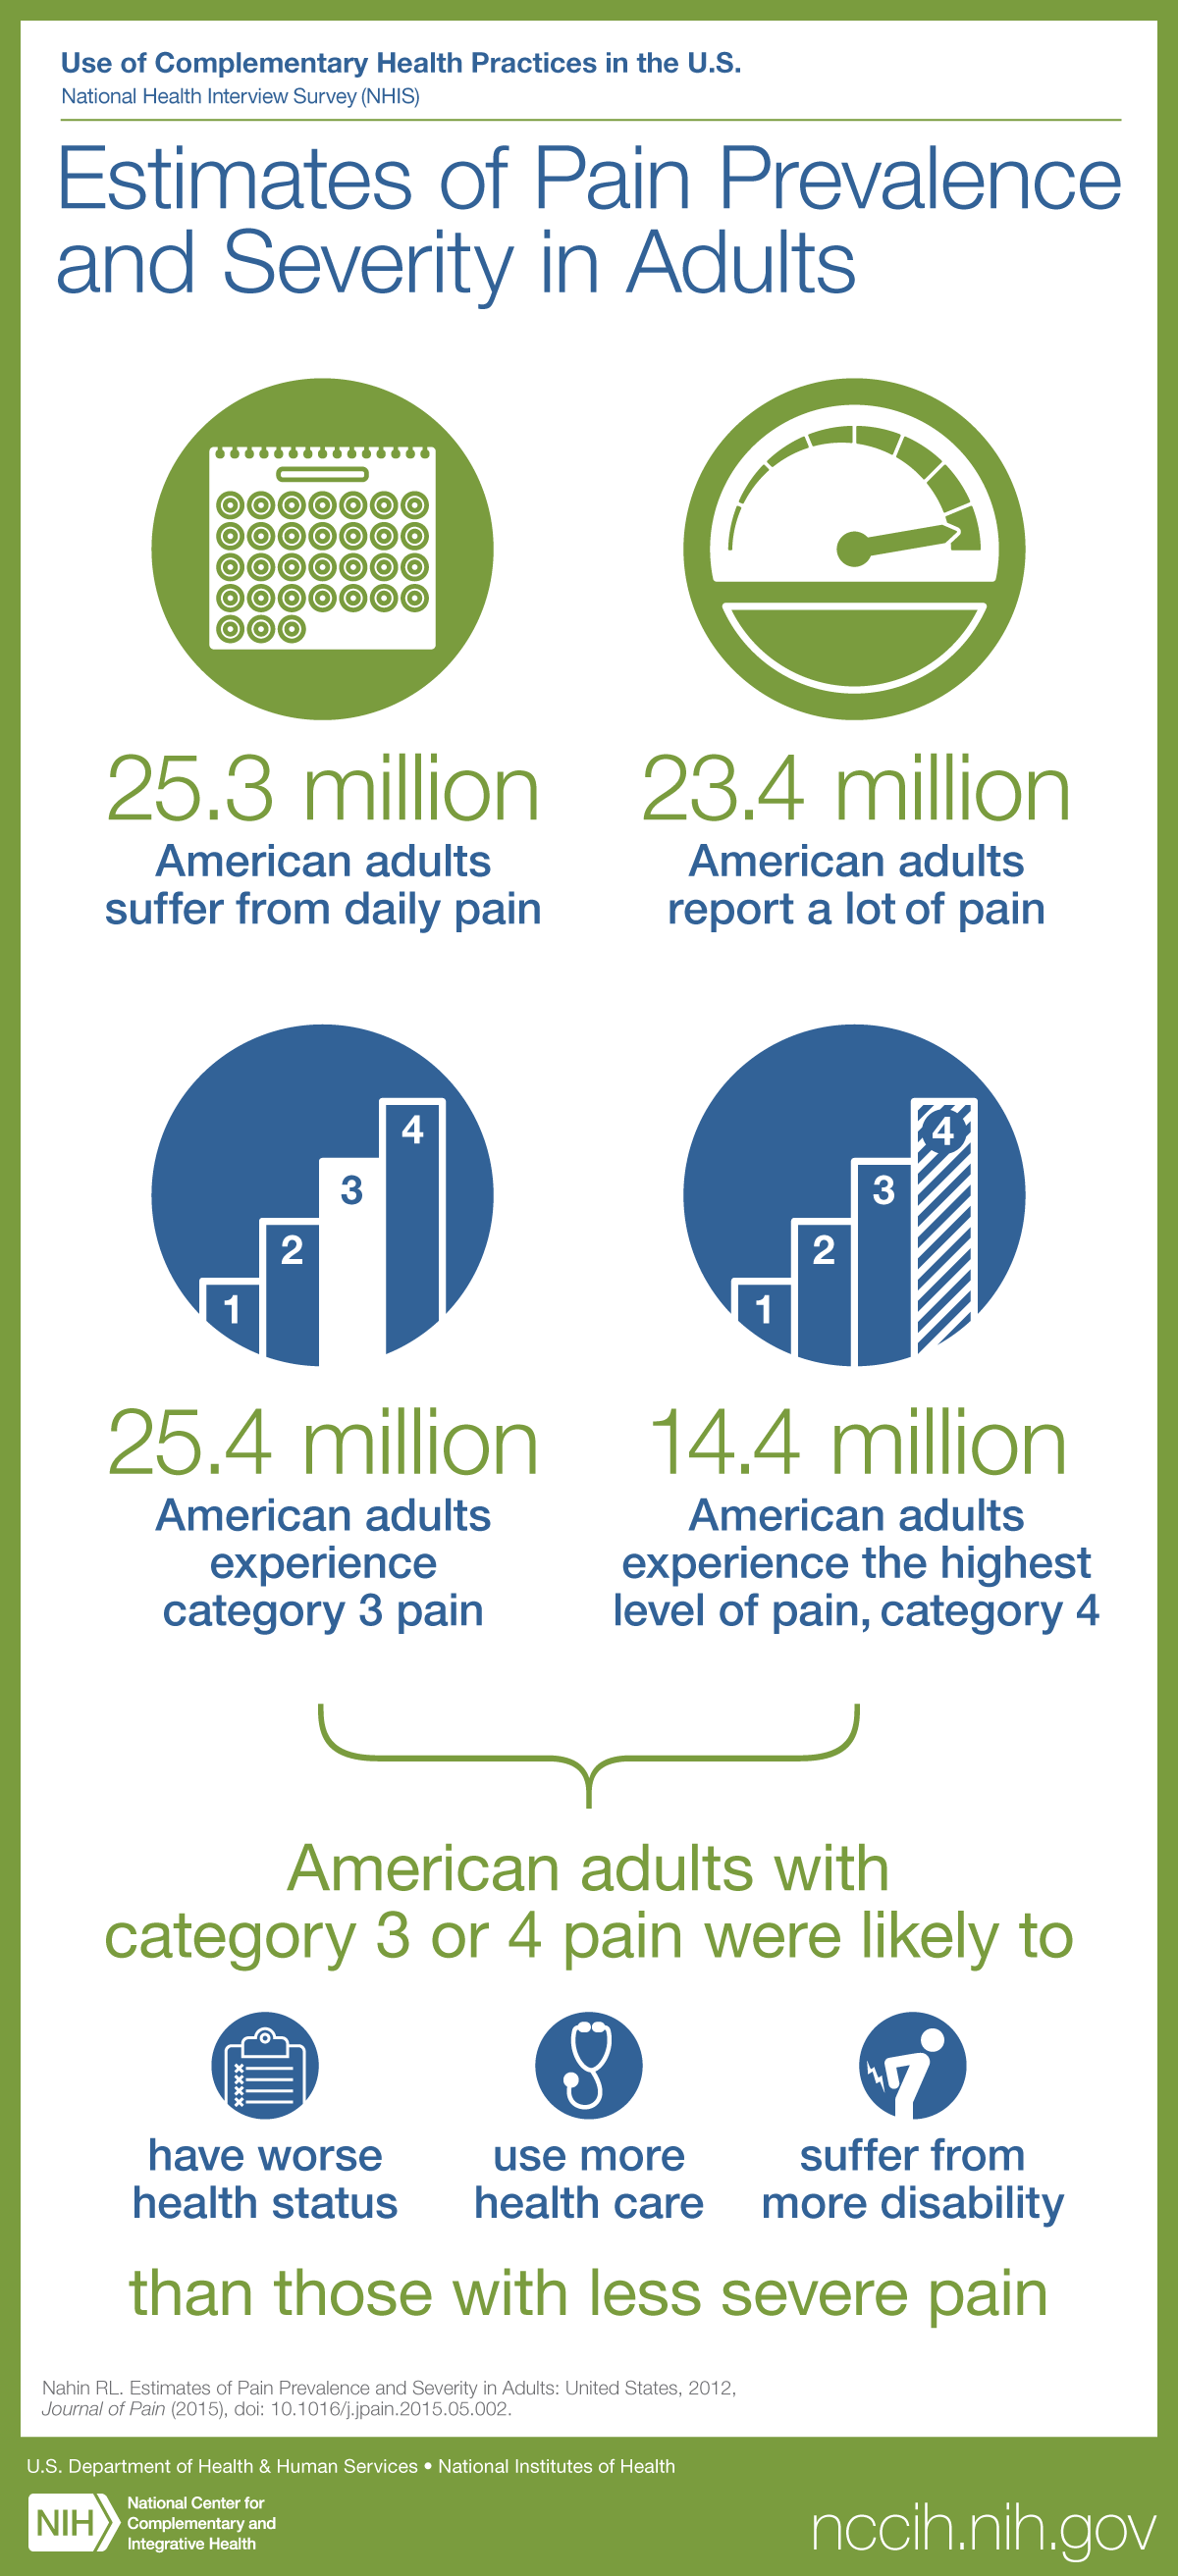 Estimates of Pain Prevalence and Severity in Adults